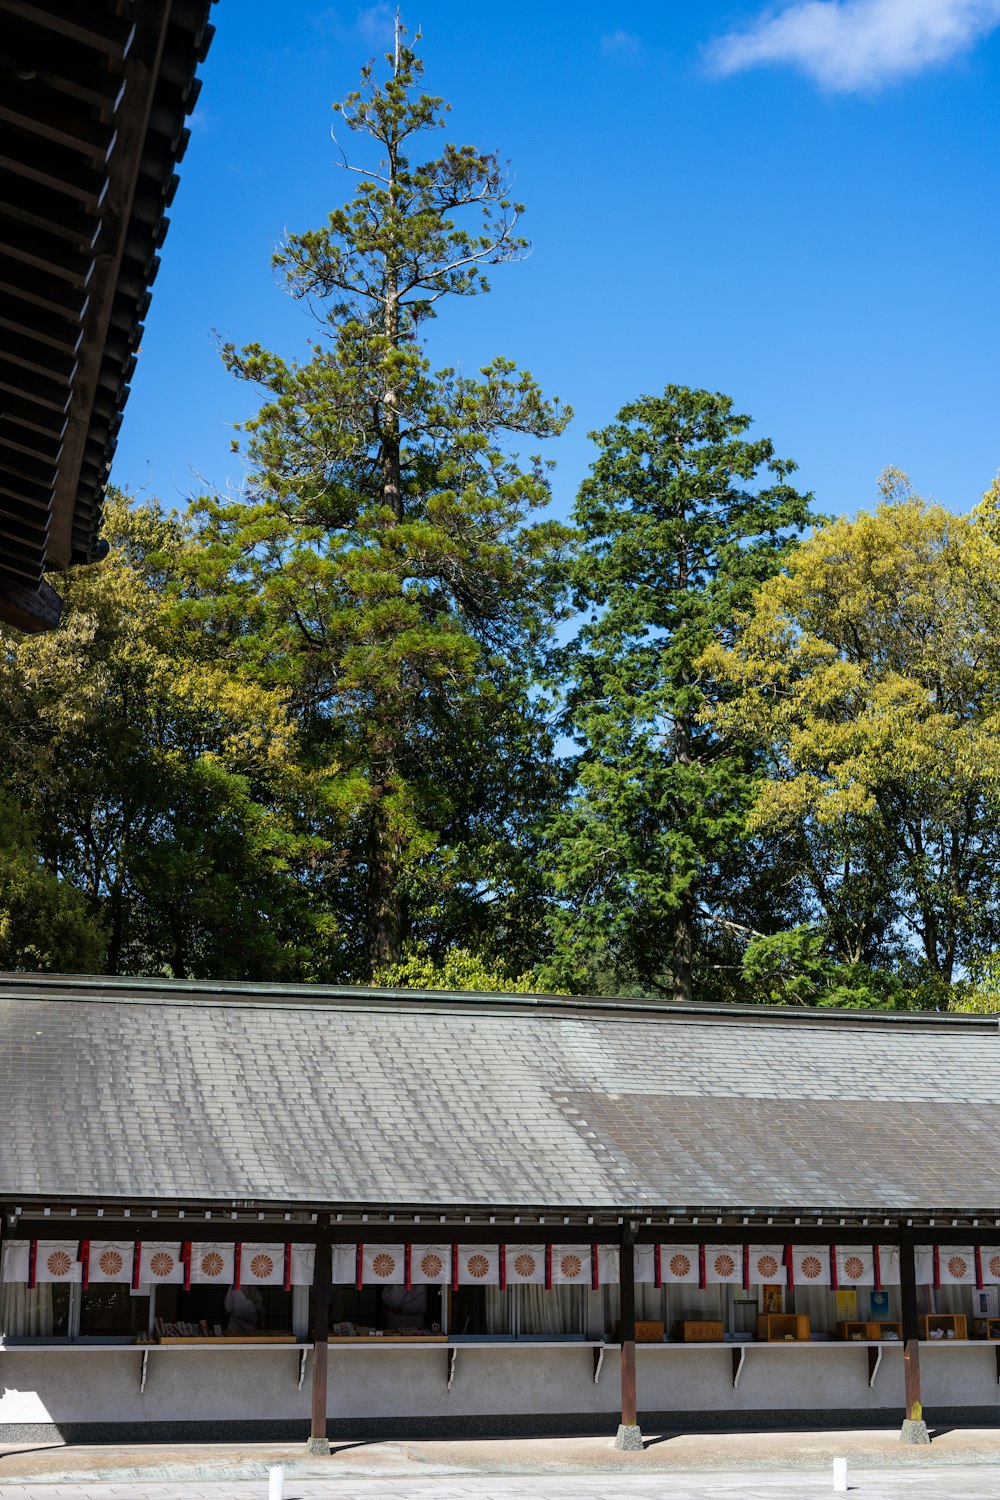 the roof of a building with trees in the background